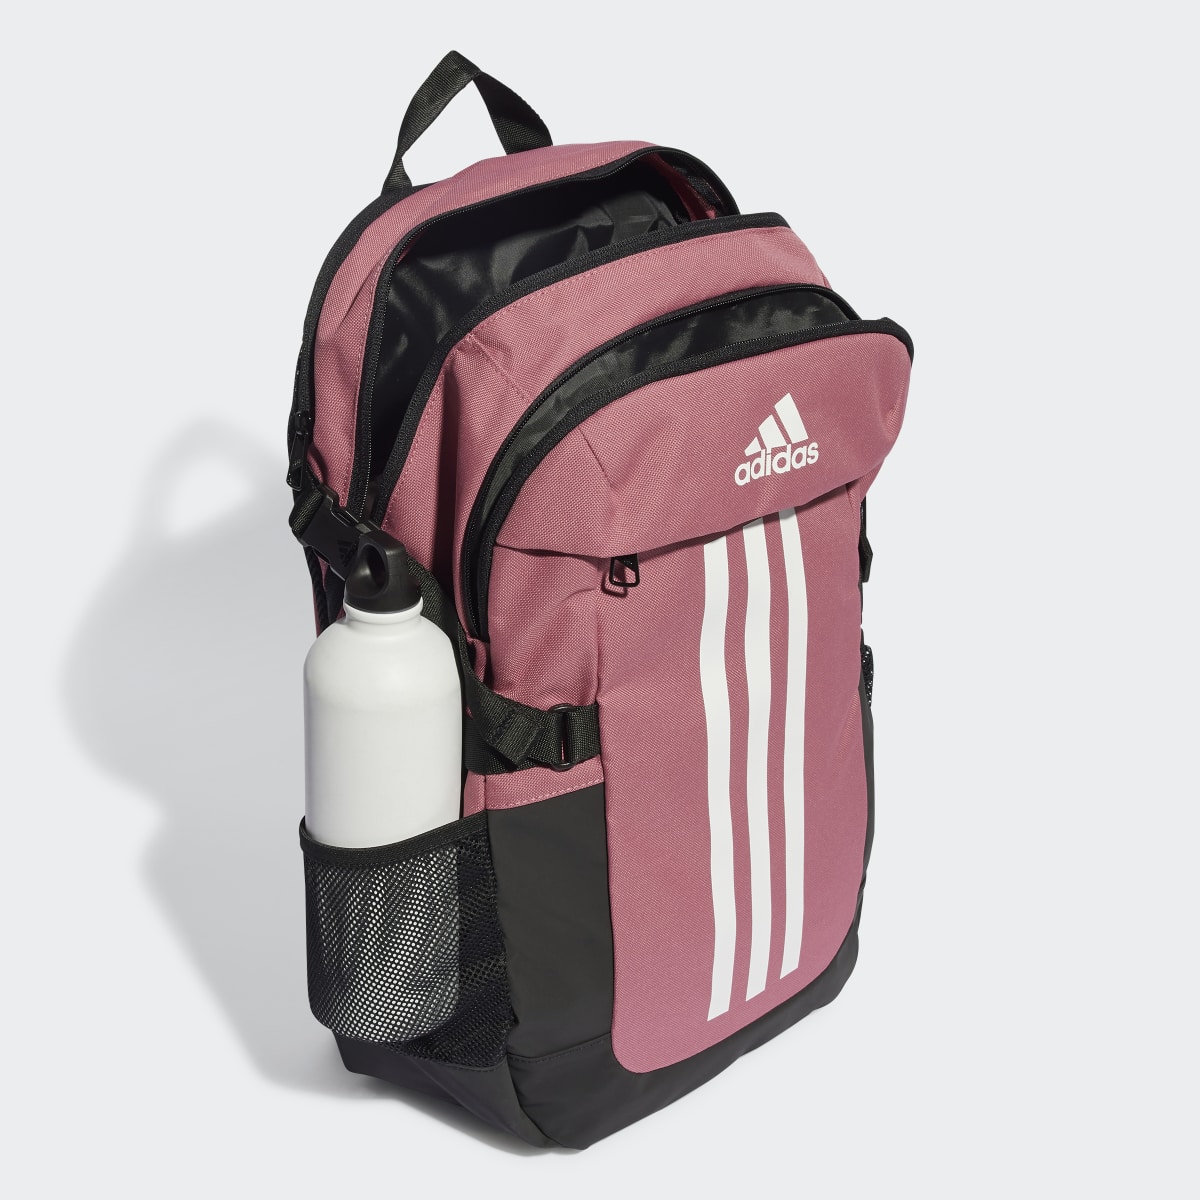 Adidas Power Backpack. 5